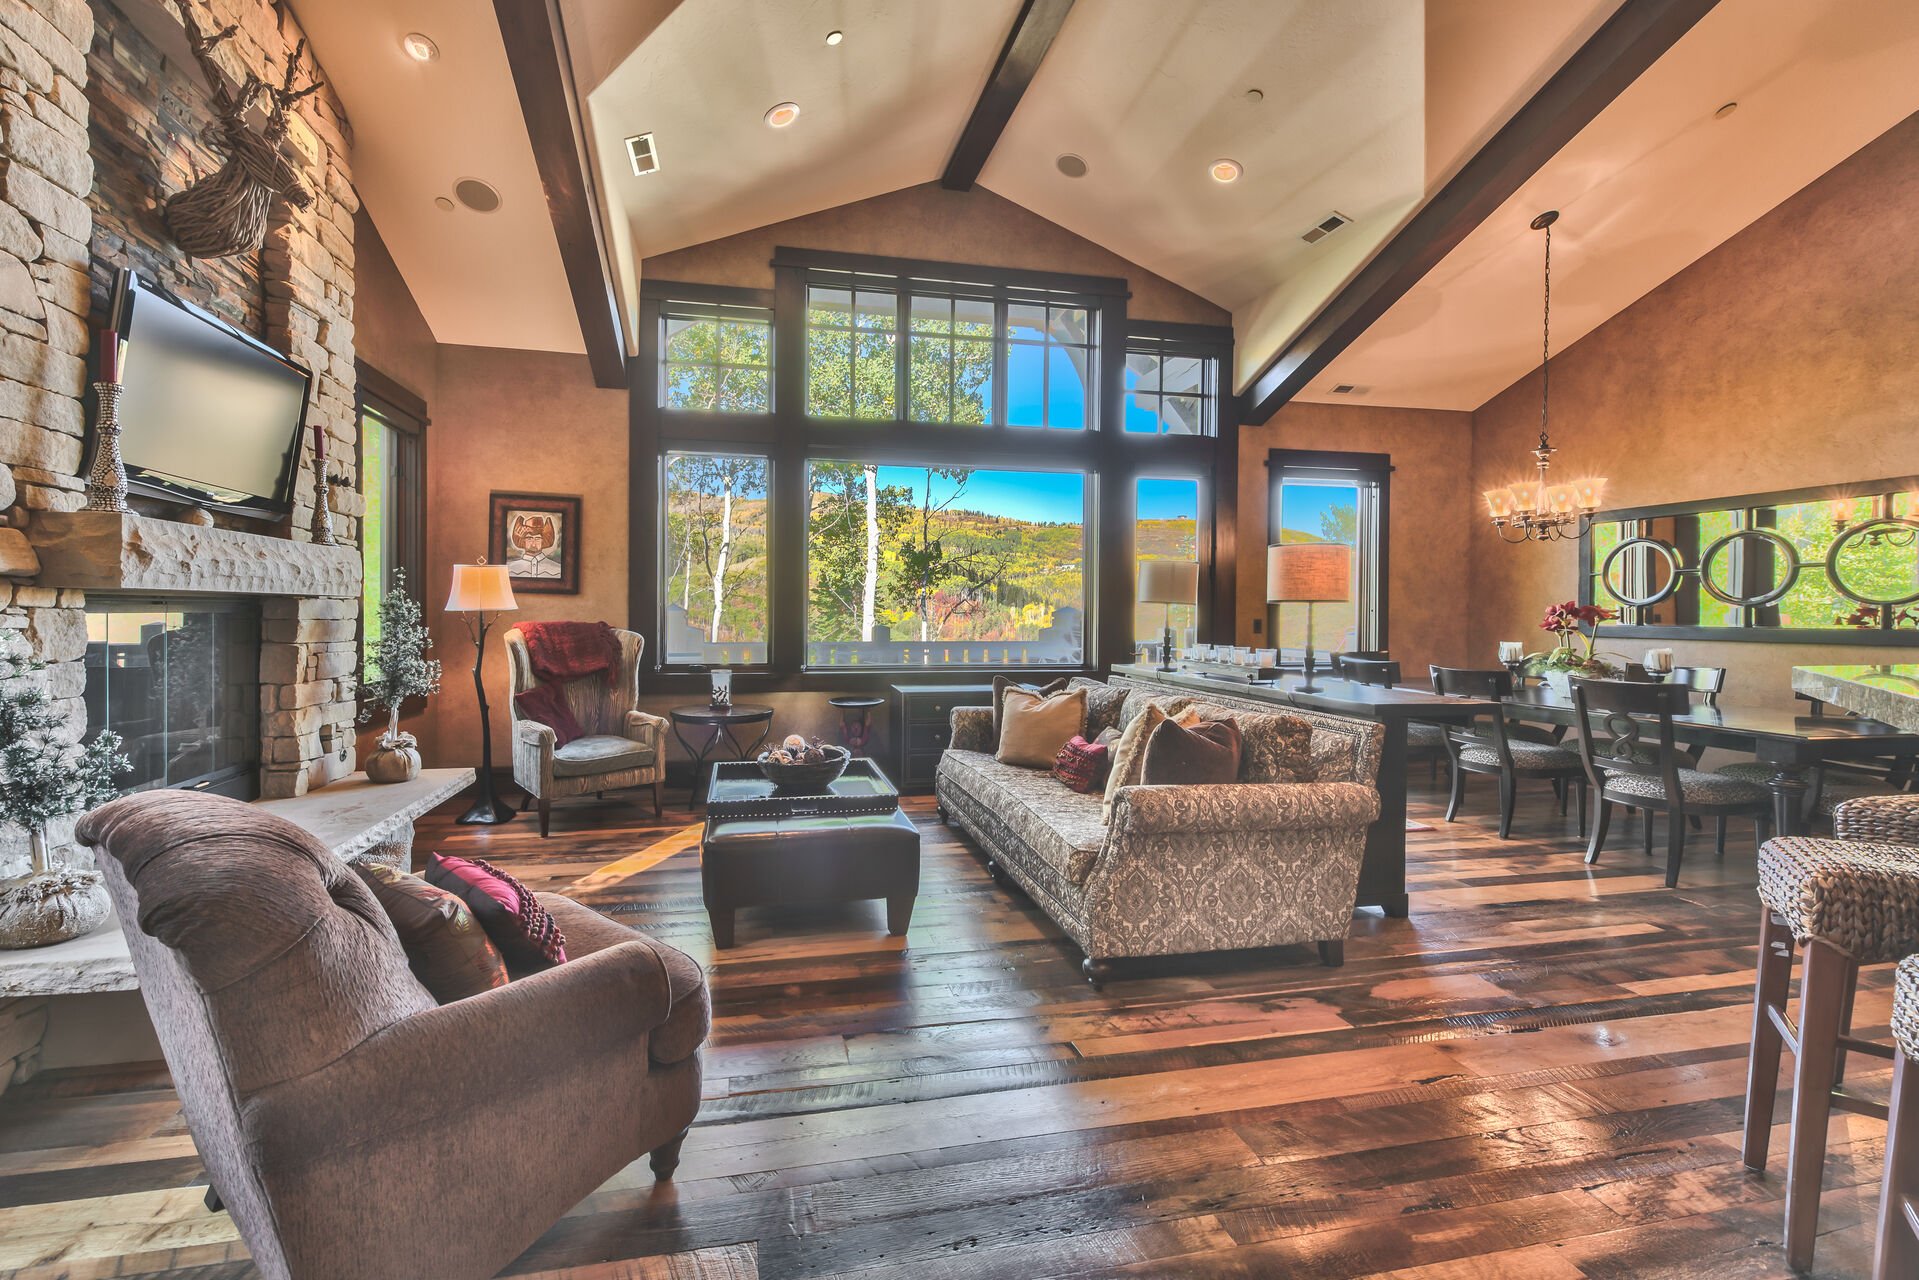 Living Room, Gourmet Kitchen and Dining Area - All with Beautiful Hardwood Floors and Ski  Resort Views